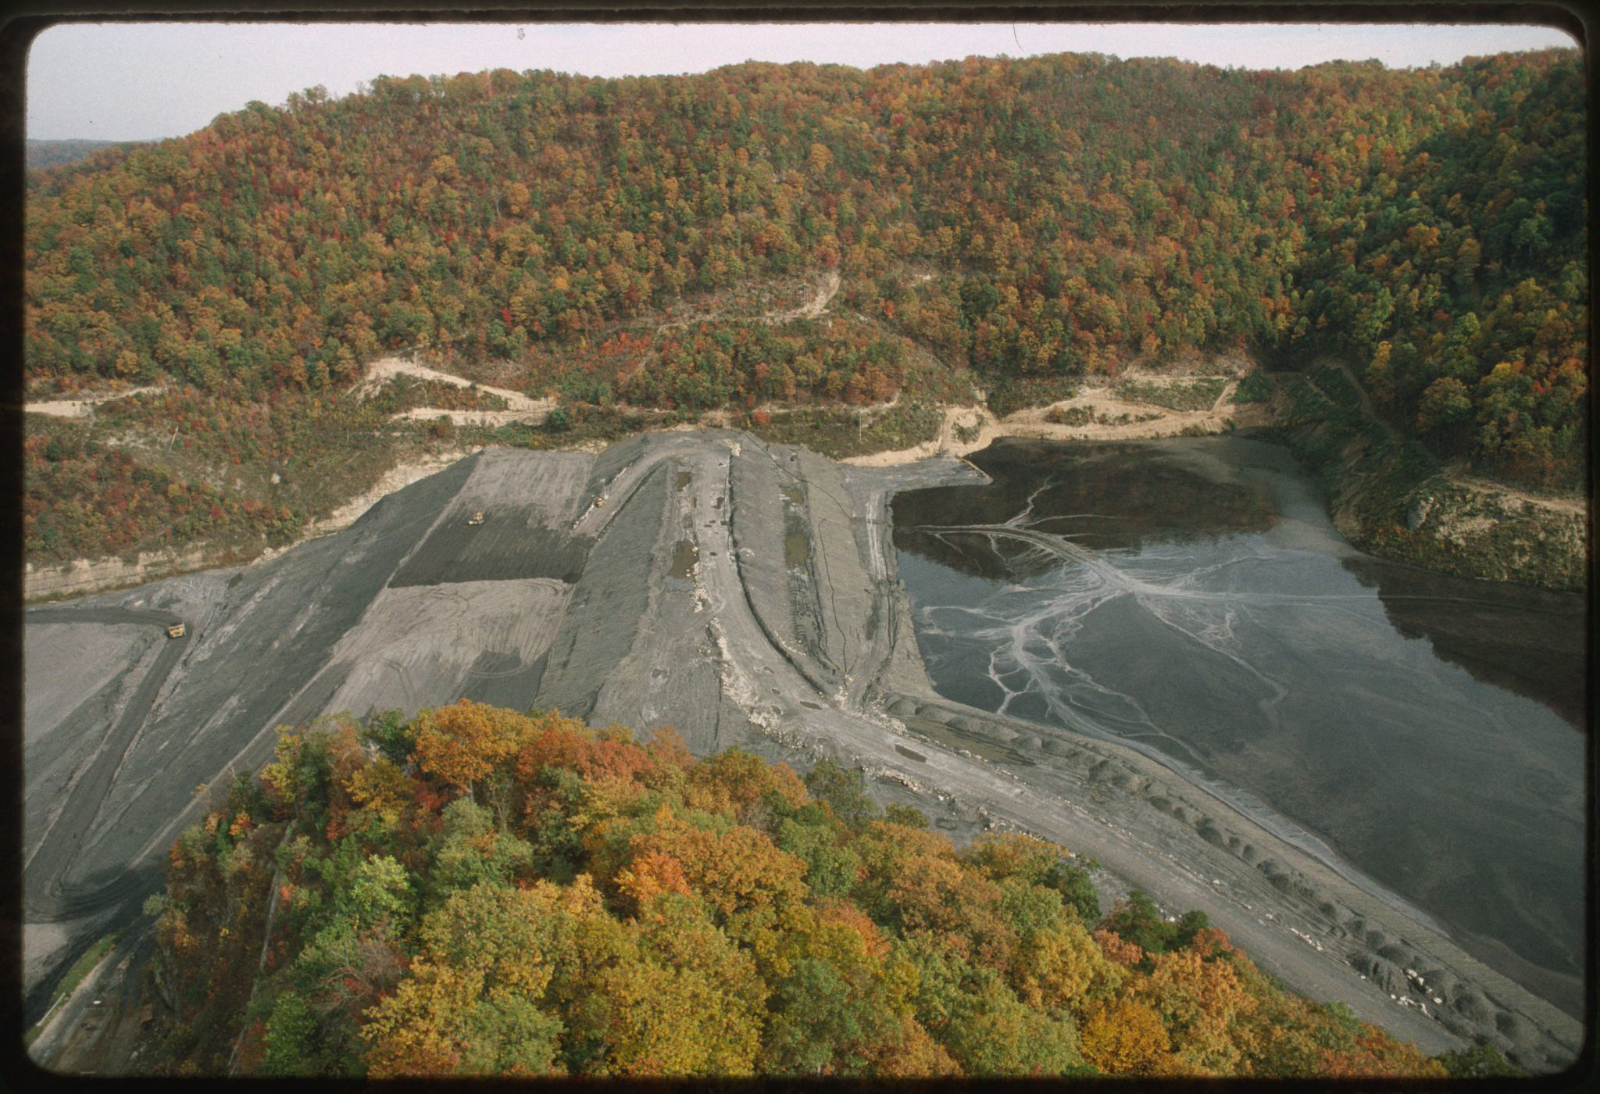 Aerial view of a coal mining "sludge dam"; tree covered mountains surround a cleared area that leads to a dam filled with gray sludge